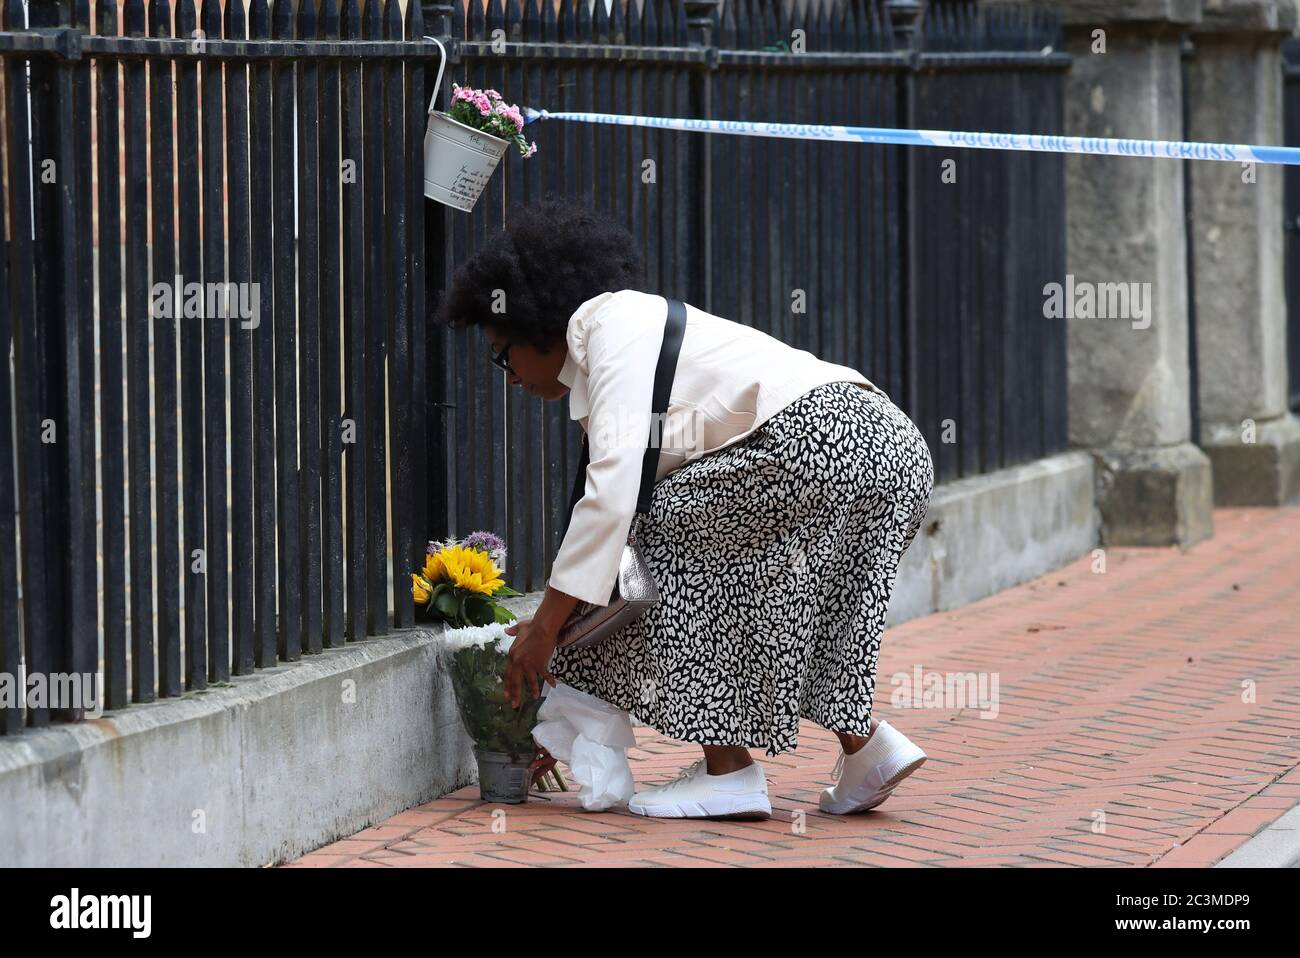 A woman places some flowers at the Abbey gateway of Forbury Gardens in Reading town centre following a multiple stabbing attack in the gardens which took place at around 7pm on Saturday leaving three people dead and another three seriously injured. Stock Photo